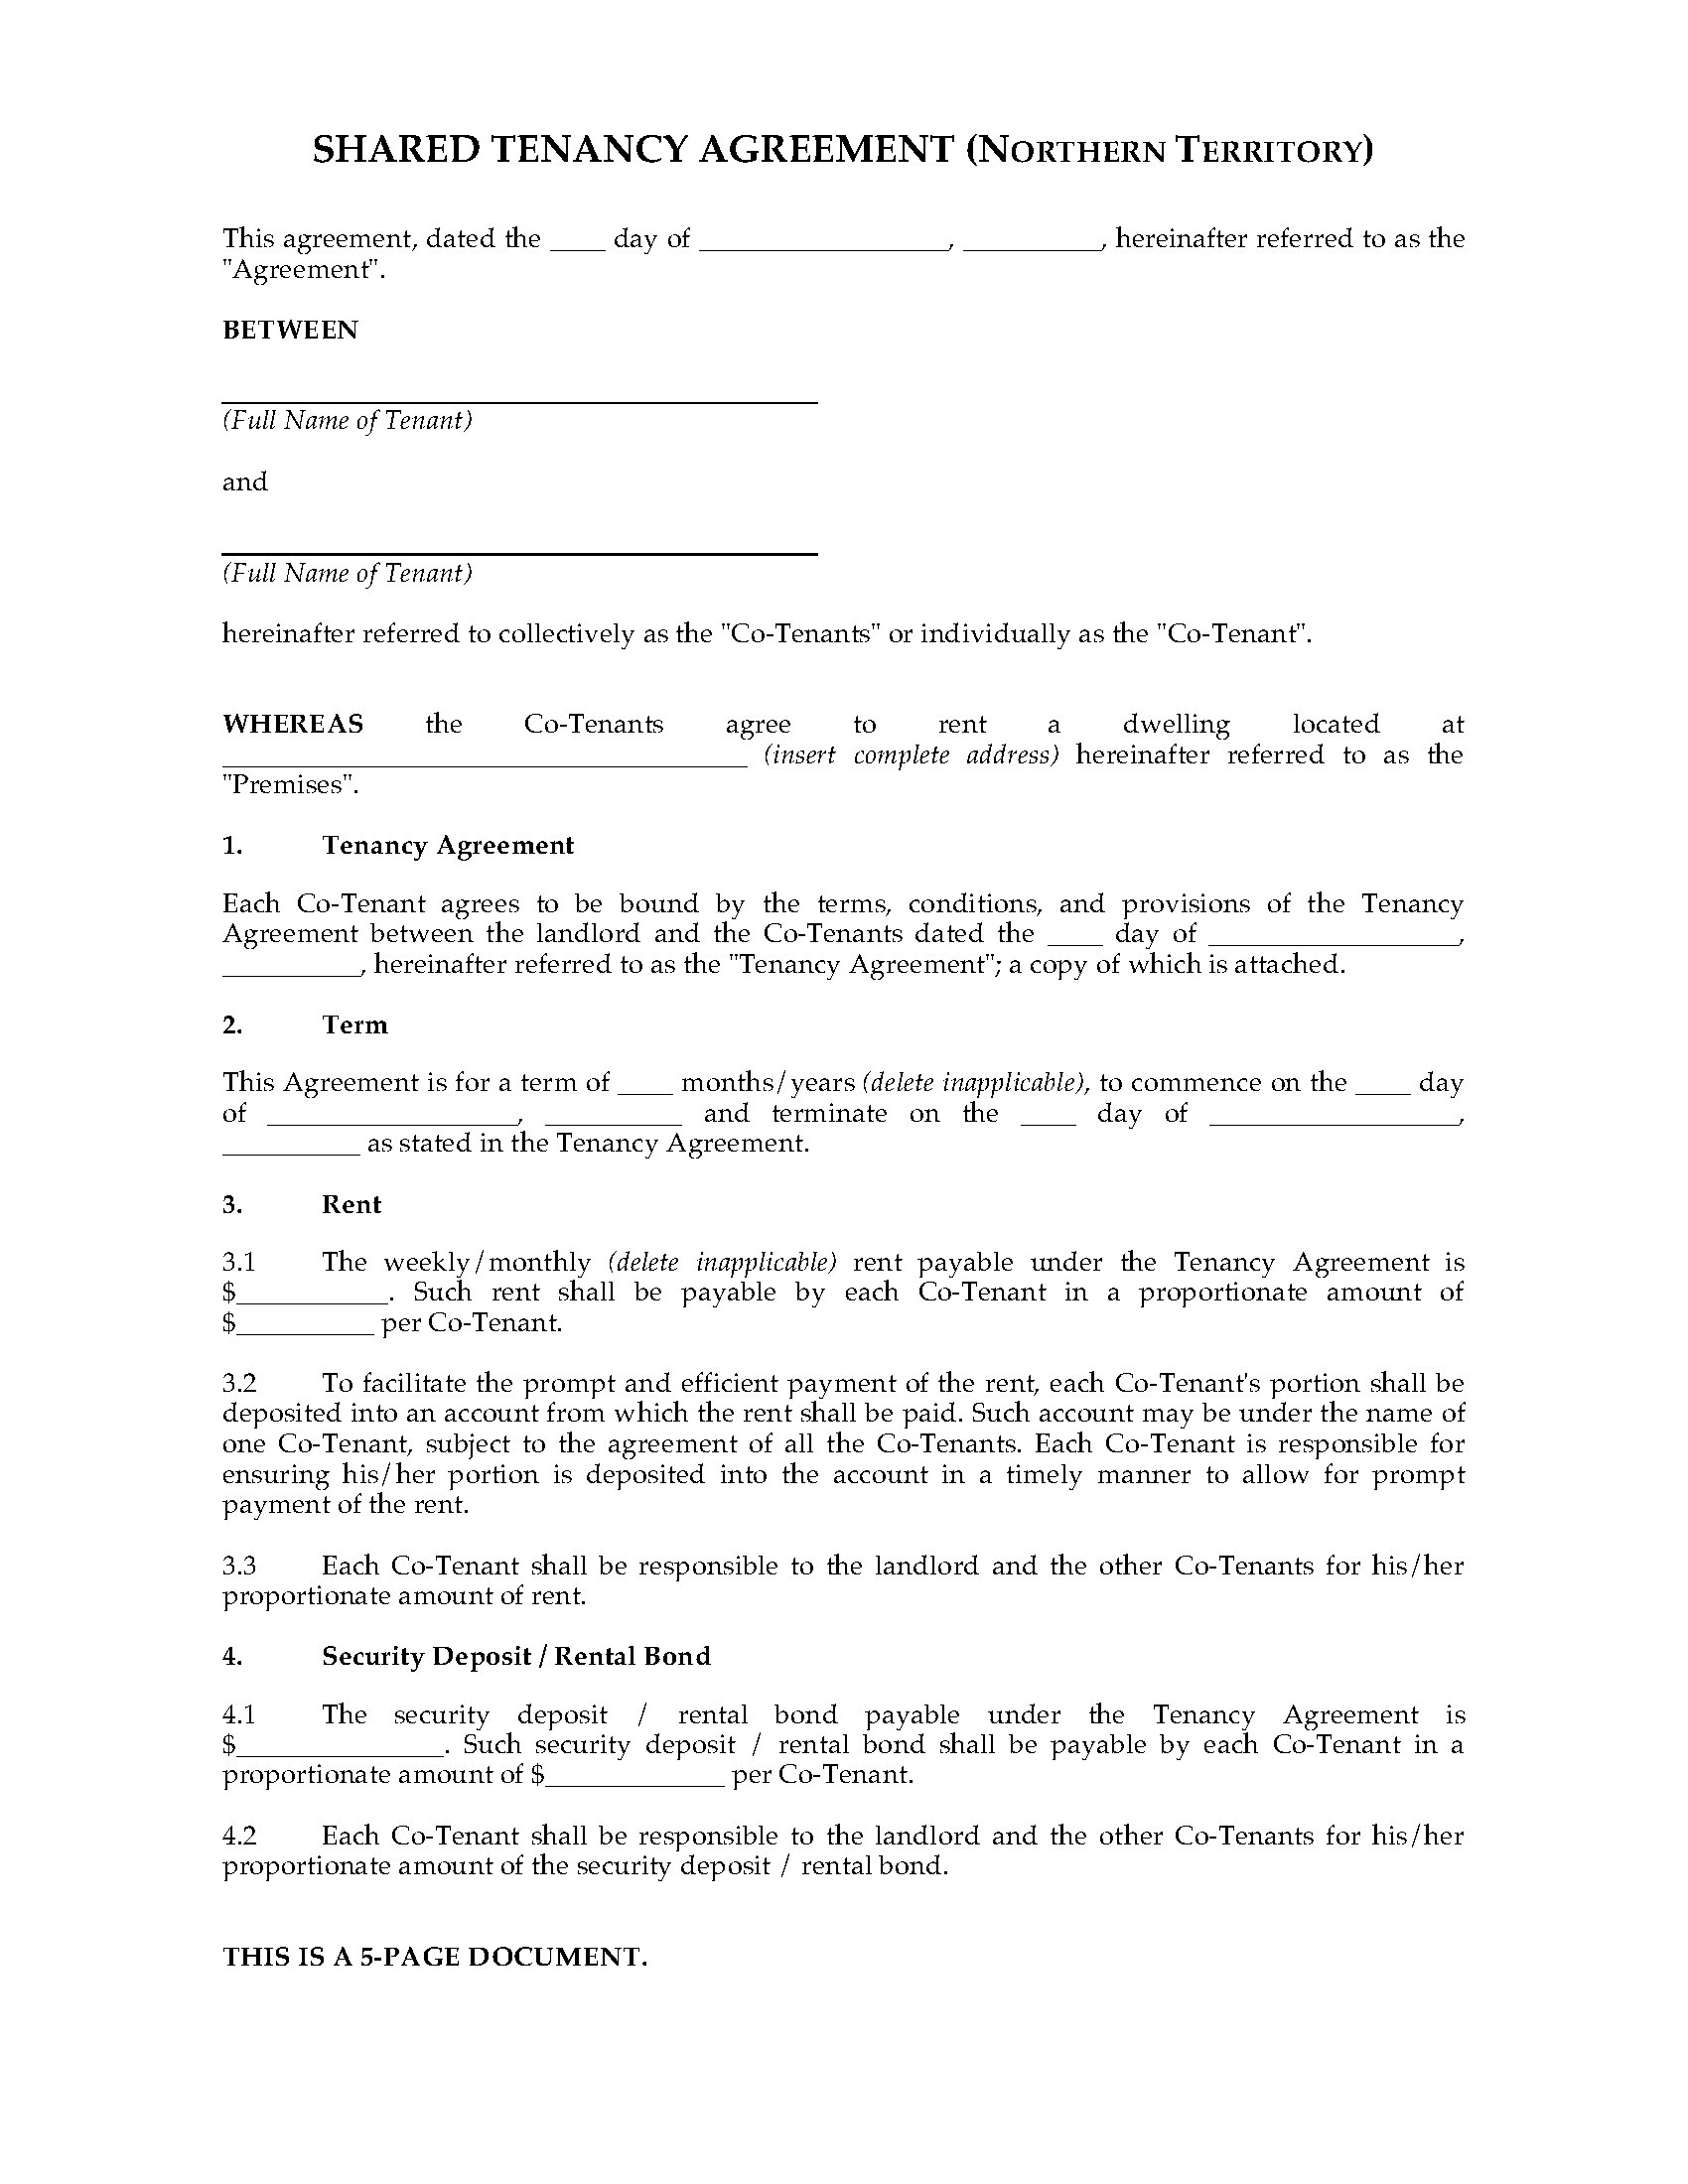 tenancy-agreement-template-nt-hq-printable-documents